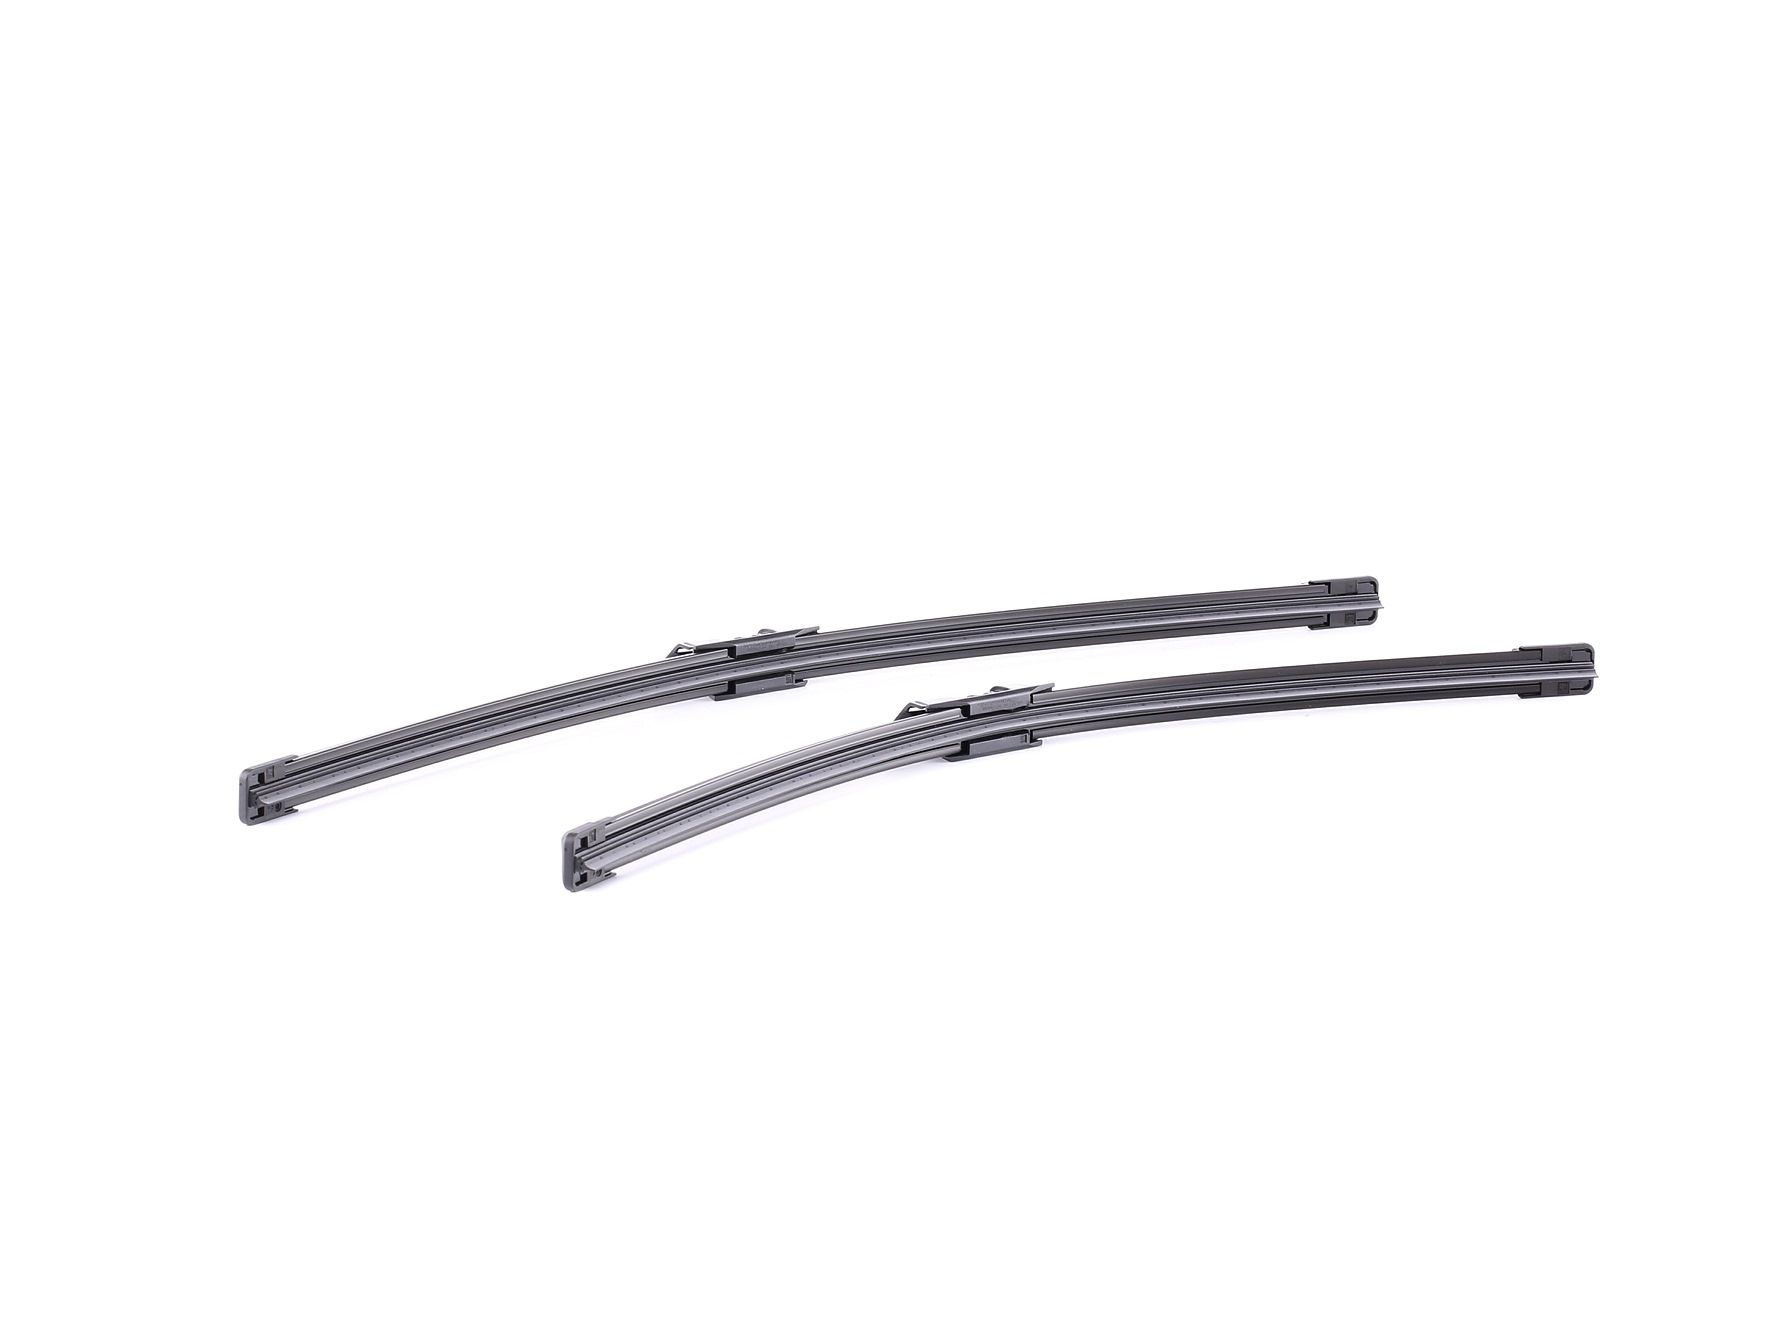 BOSCH Aerotwin 3 397 014 211 Wiper blade 550, 500 mm, Beam, for left-hand drive vehicles